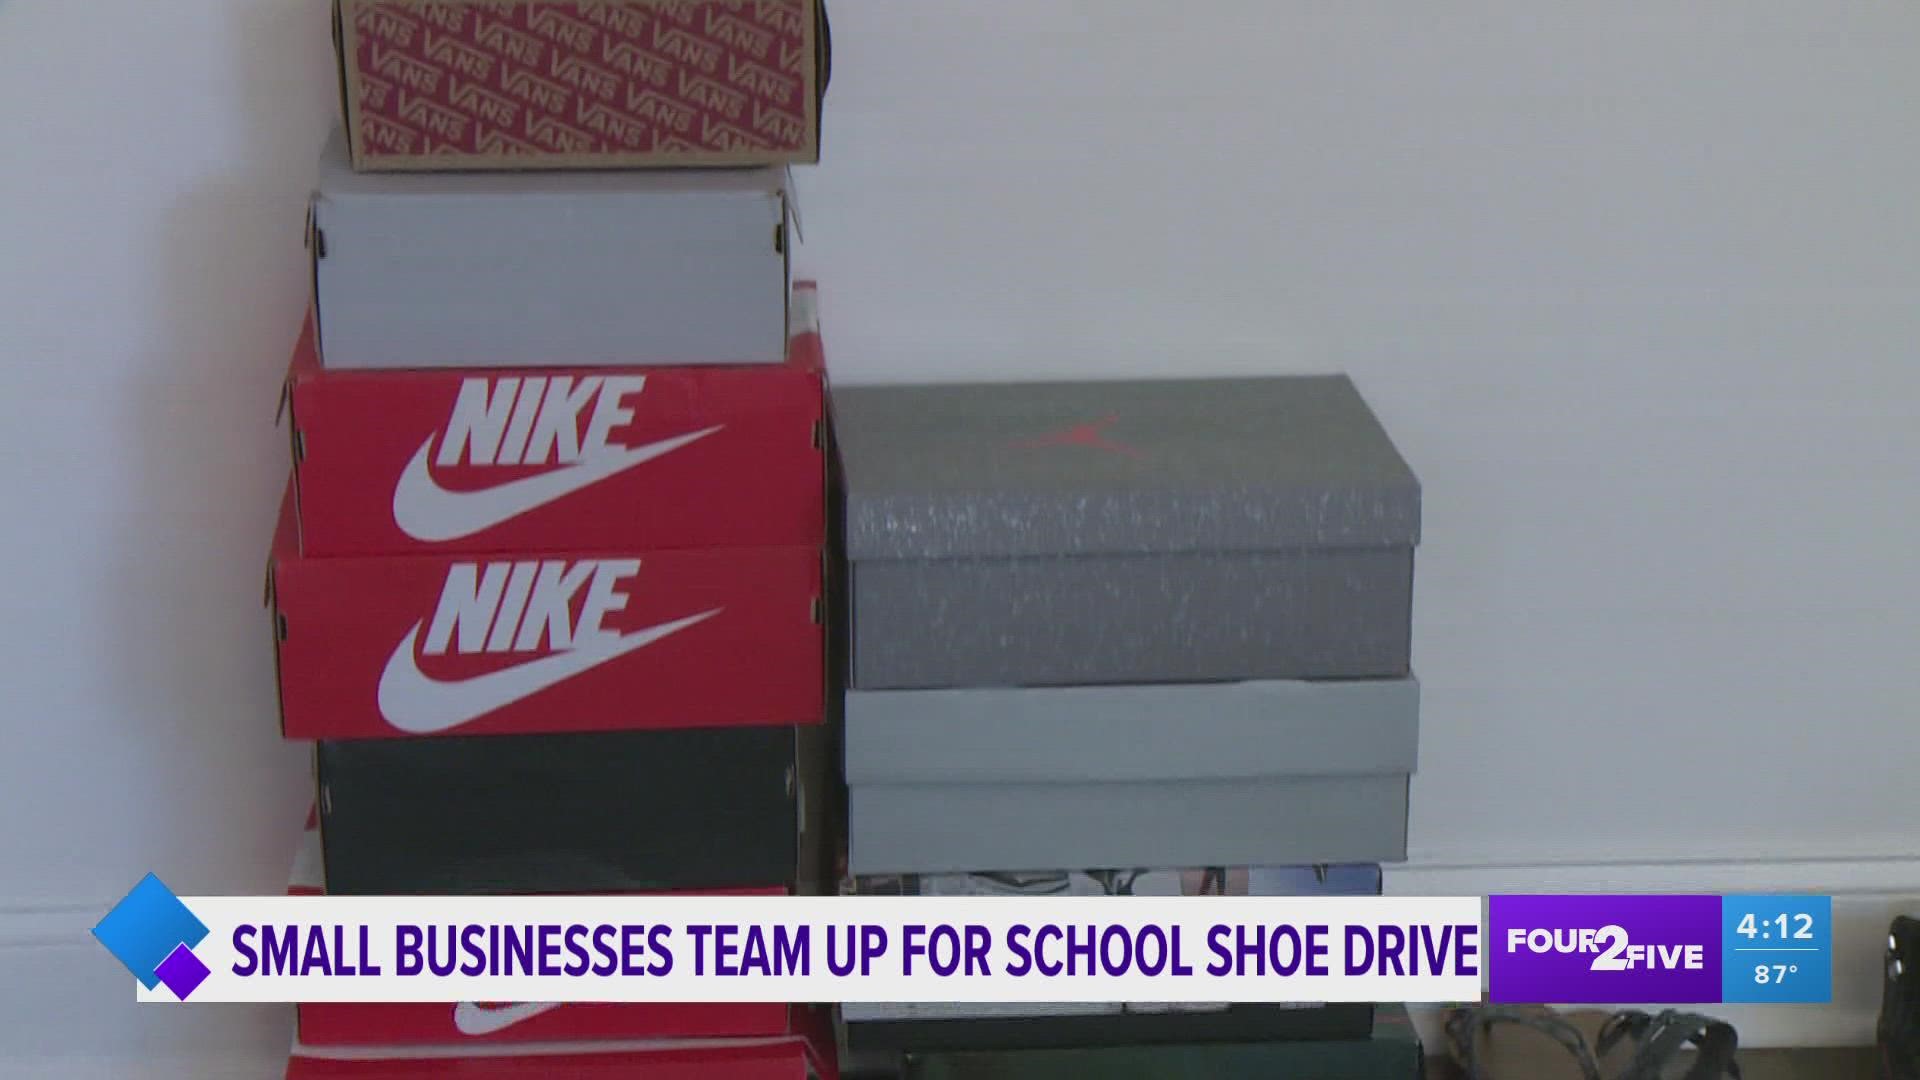 Supplies aren't the only items kids need heading back to school. A group of Greensboro business owners are helping students put their best foot forward.